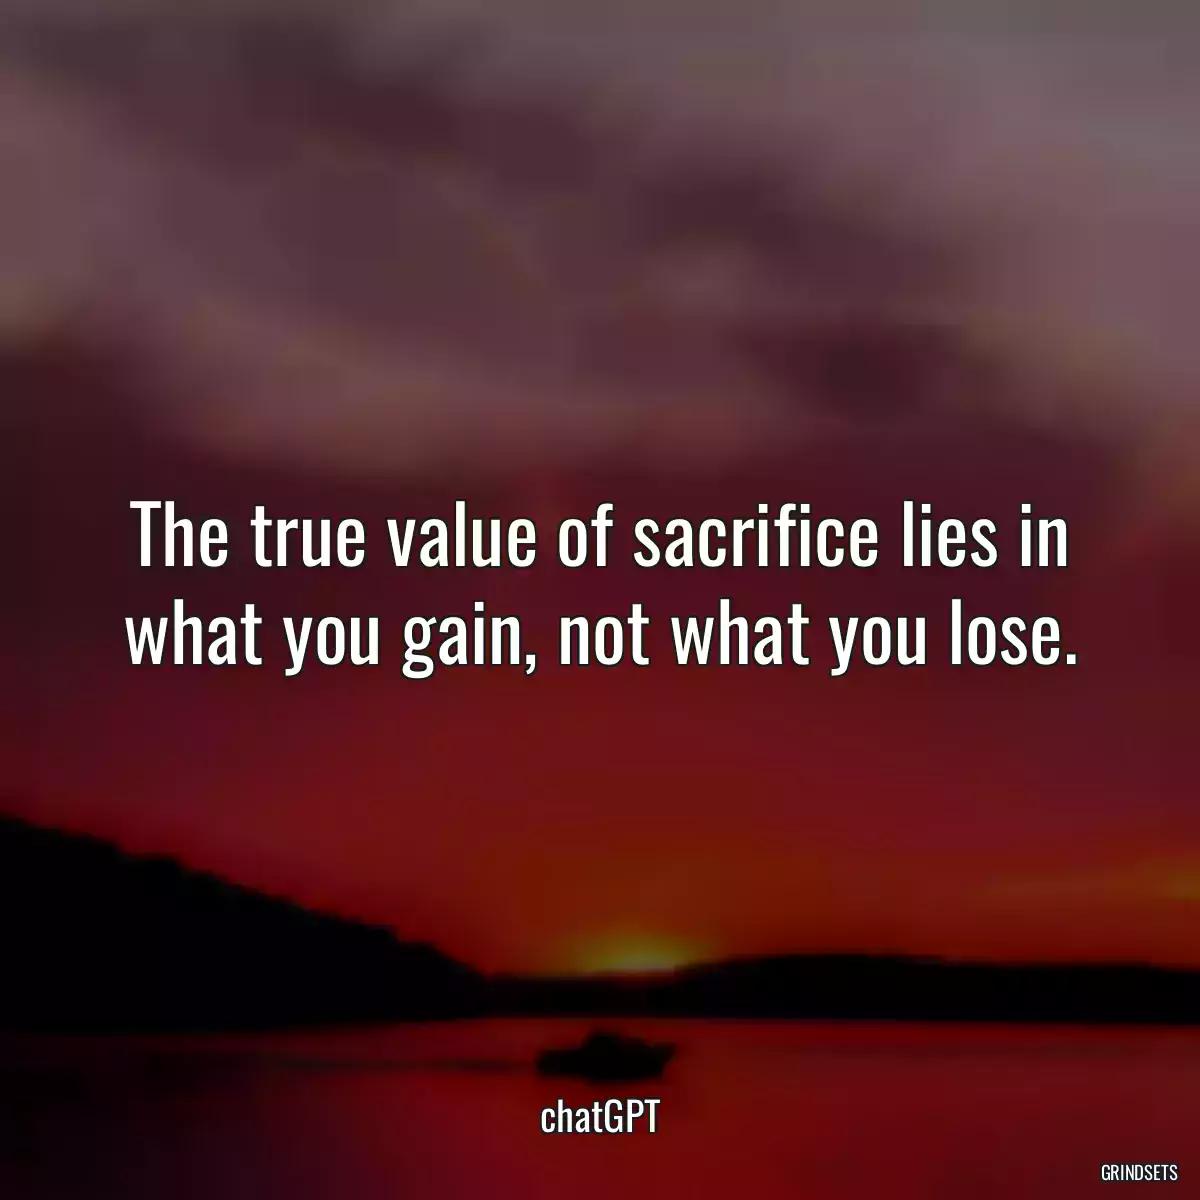 The true value of sacrifice lies in what you gain, not what you lose.